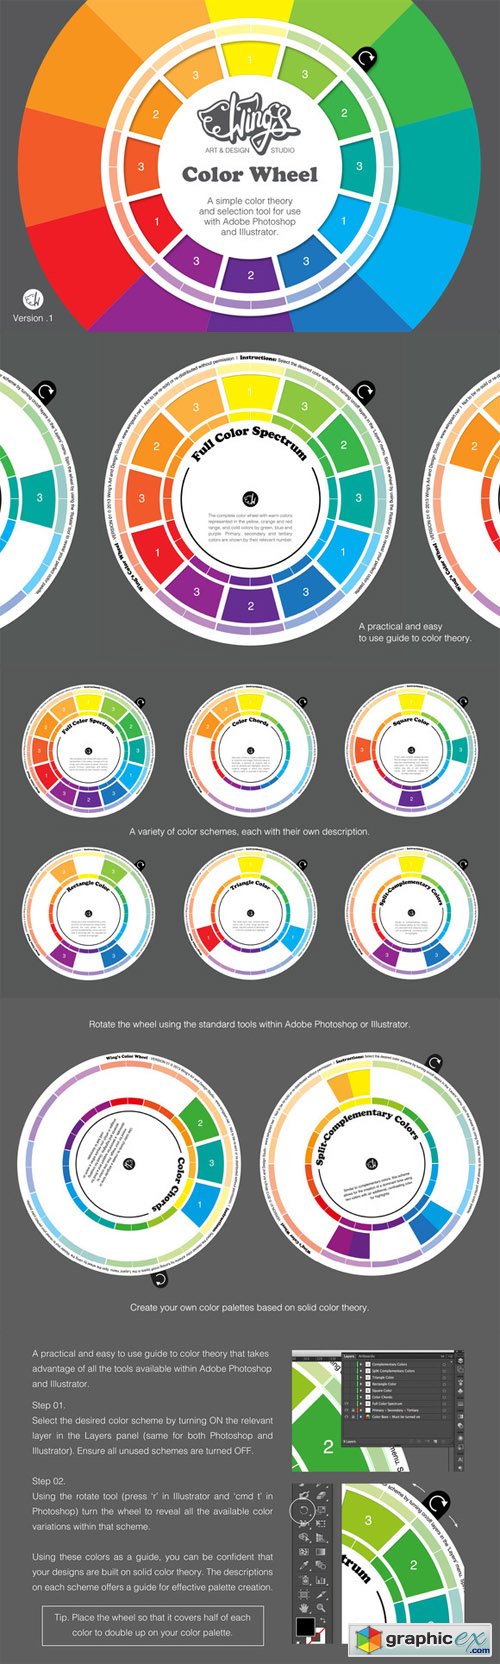 Wing's Color Wheel - Design Tool